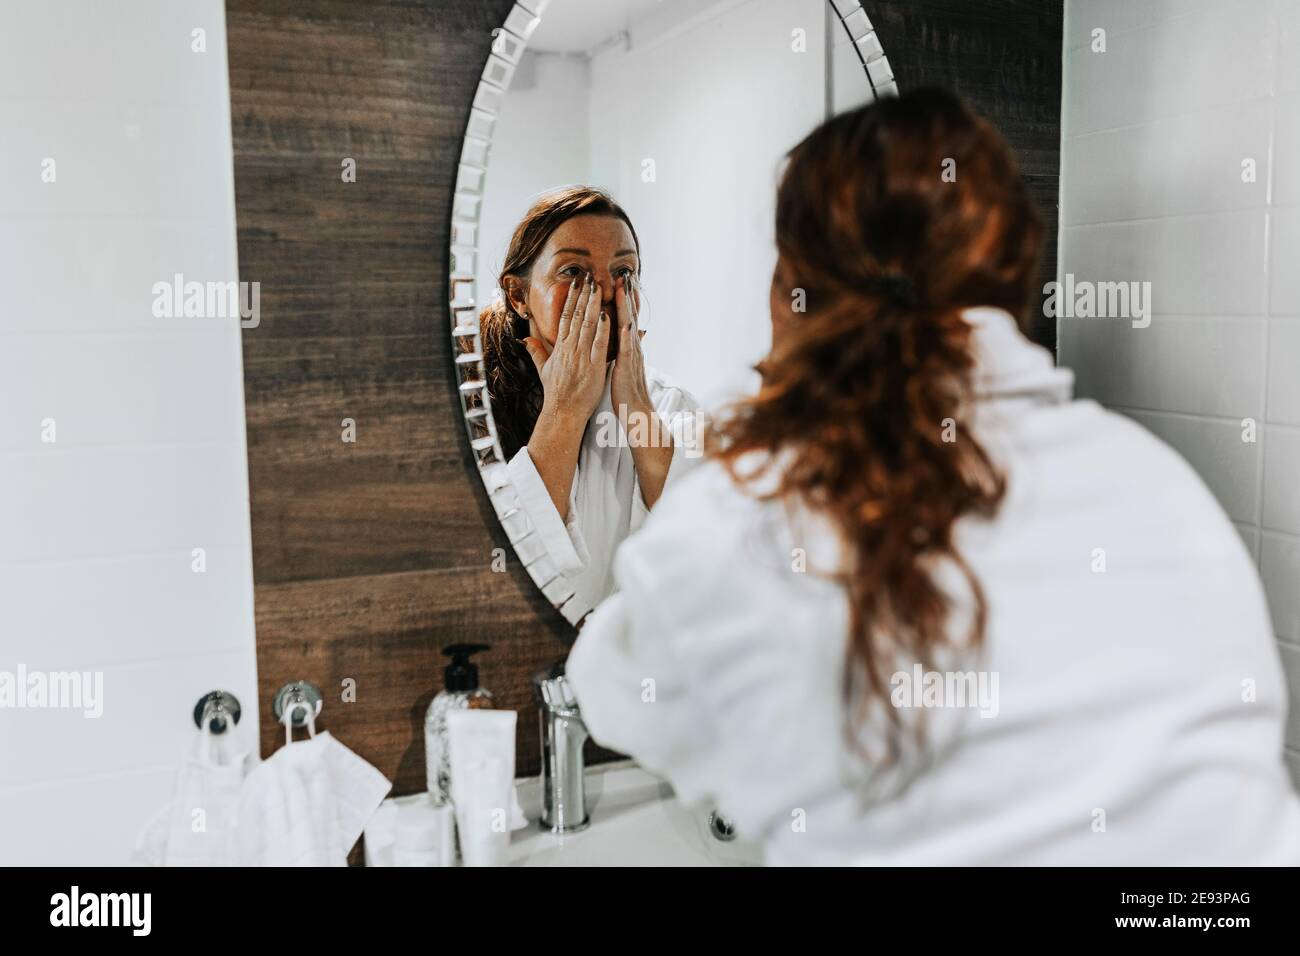 Woman applying moisturizer on her face Stock Photo